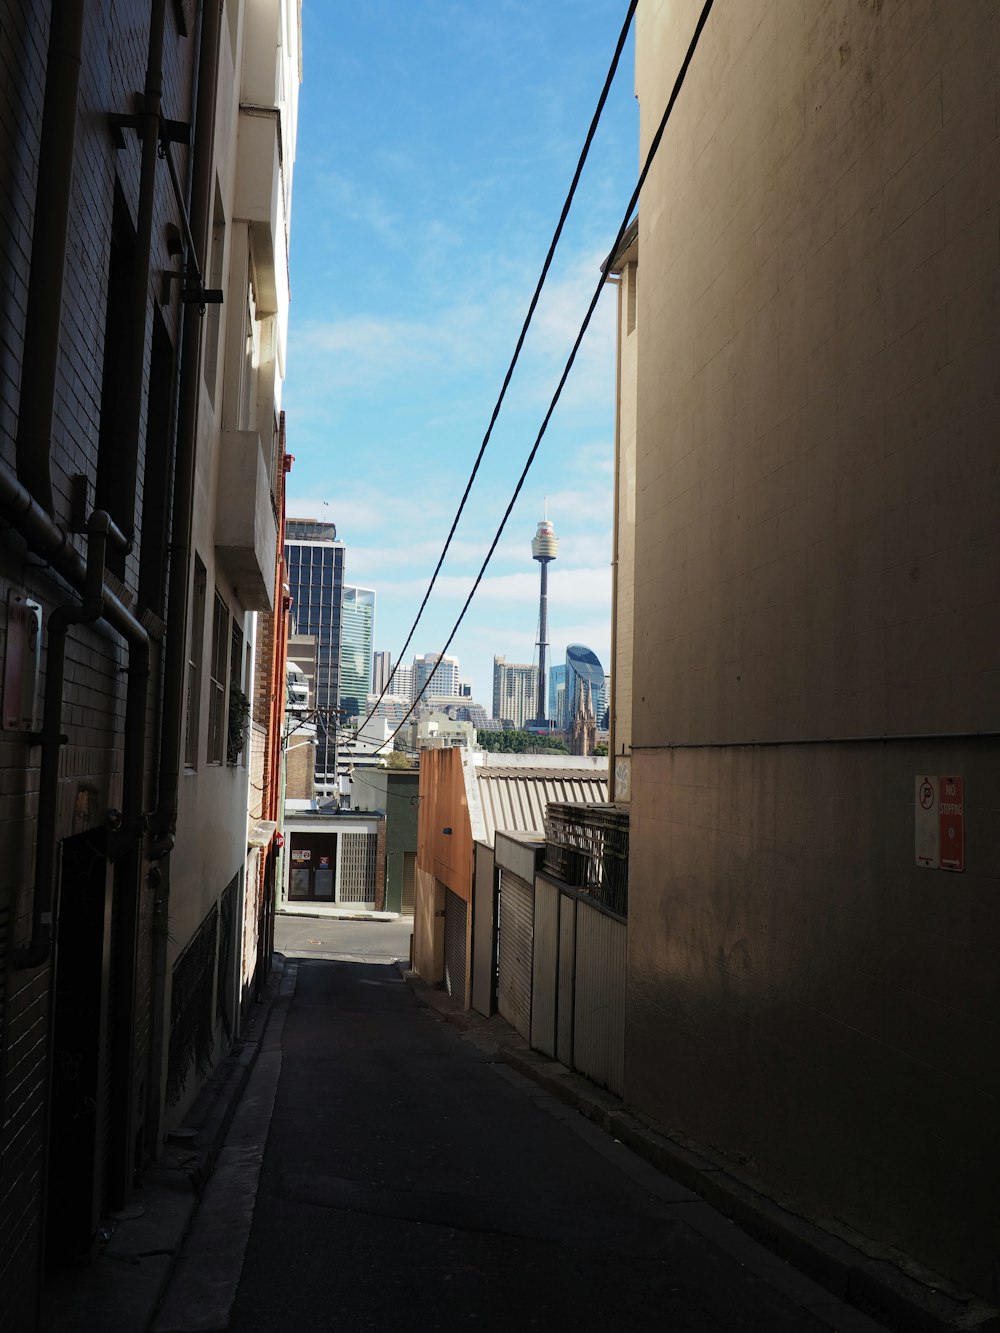 a narrow alley way with buildings in the background